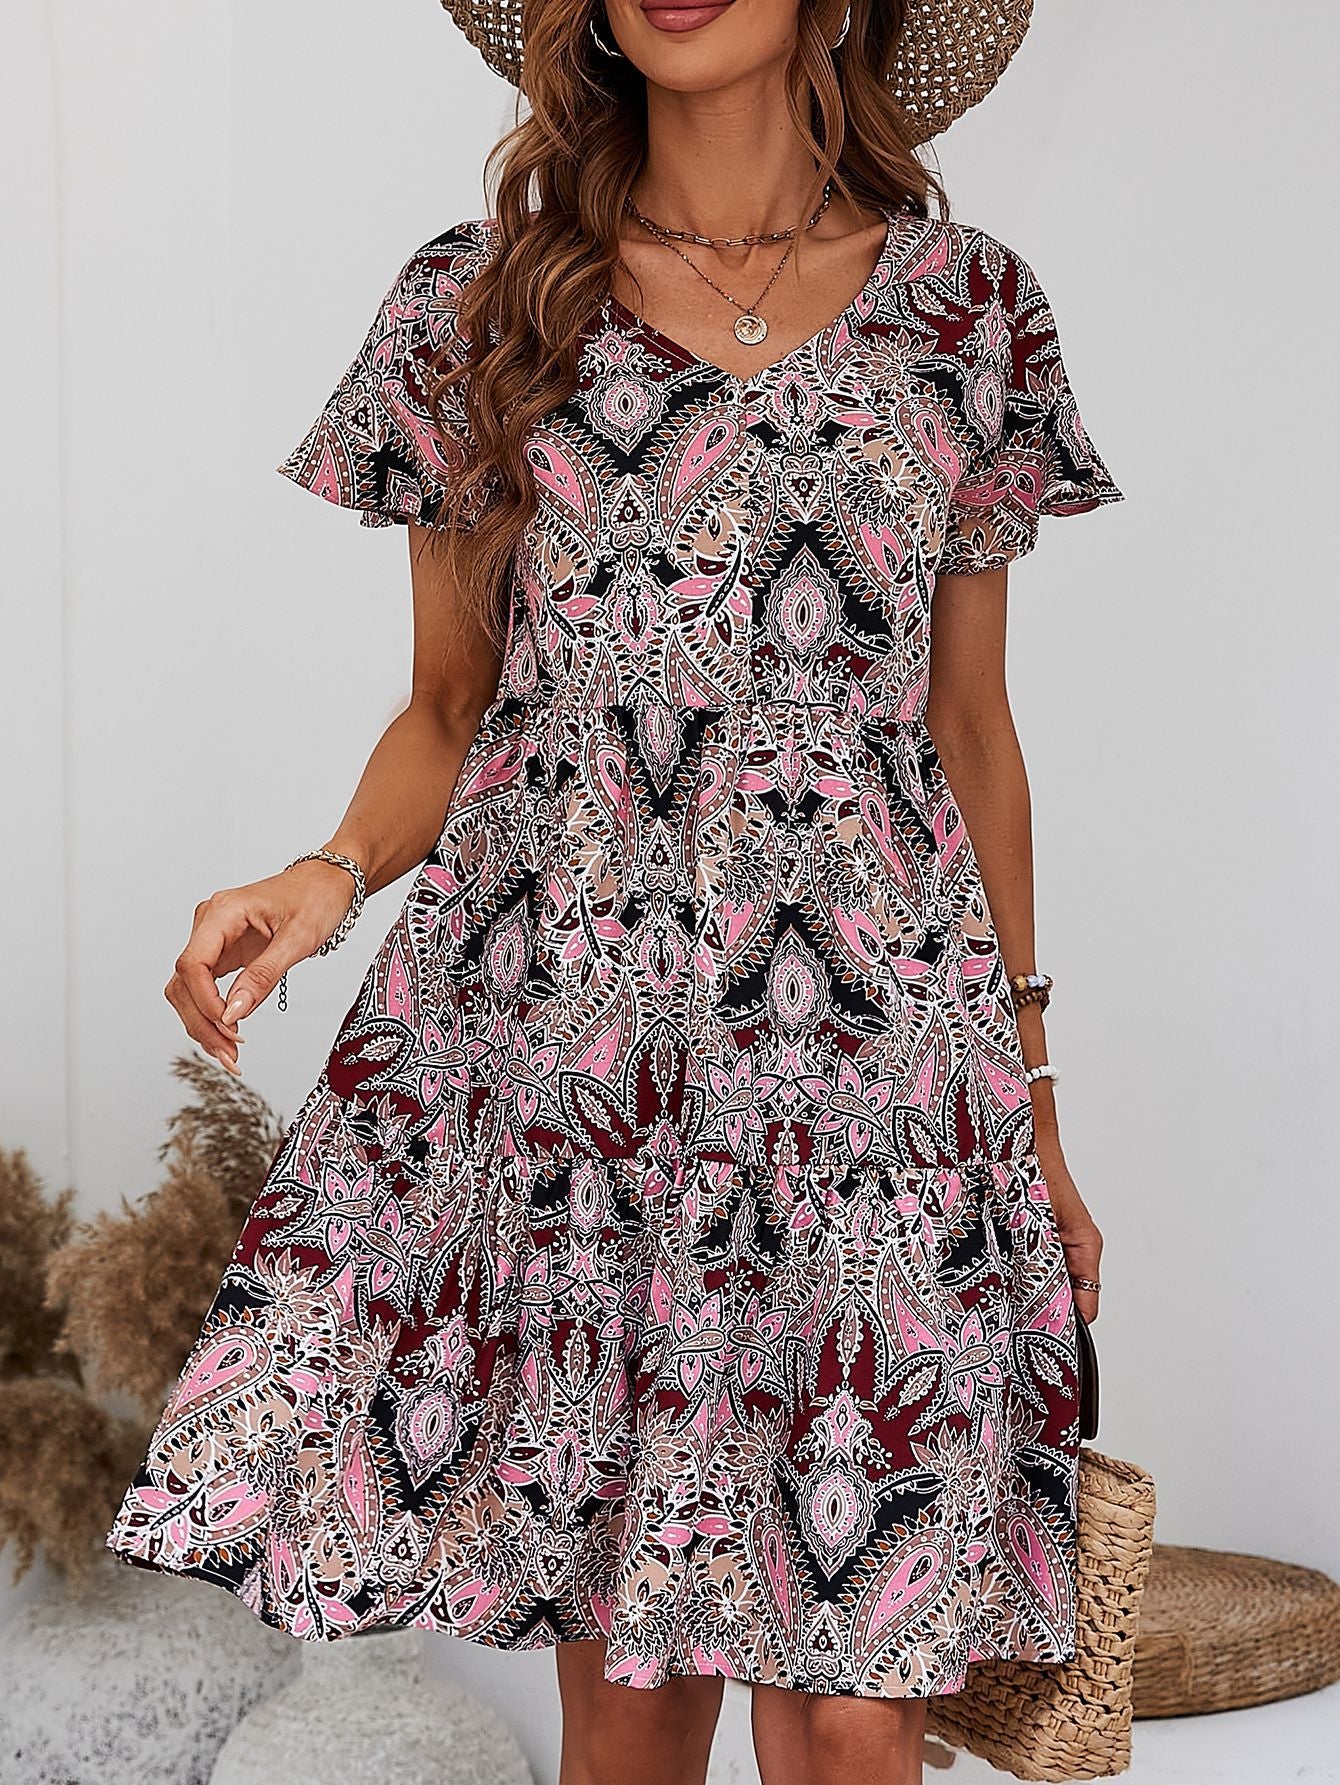 Printed V-Neck Tiered Dress - Shop women apparel, Jewelry, bath & beauty products online - Arwen's Boutique